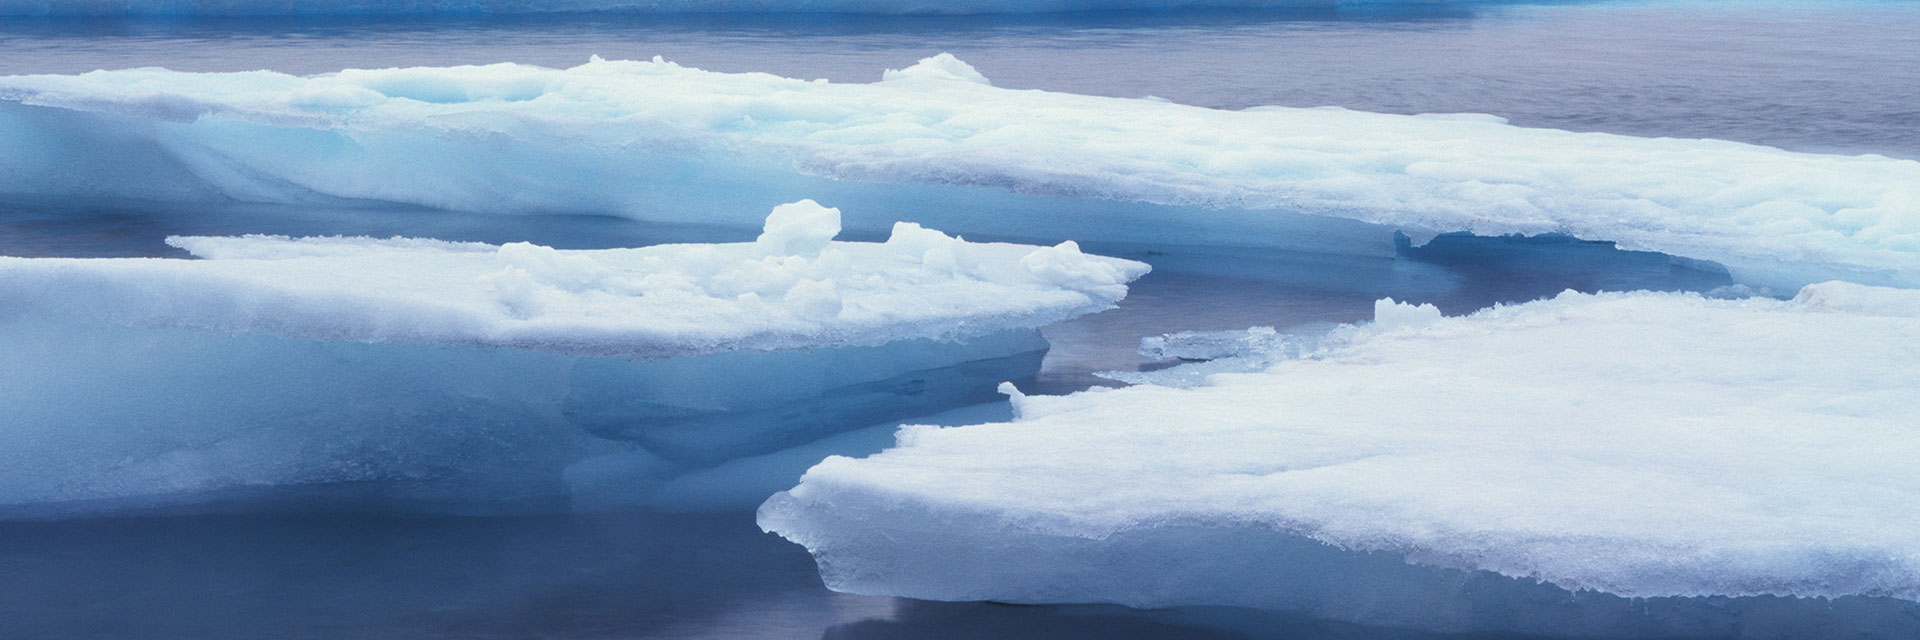 Melting ice floes, Arctic.